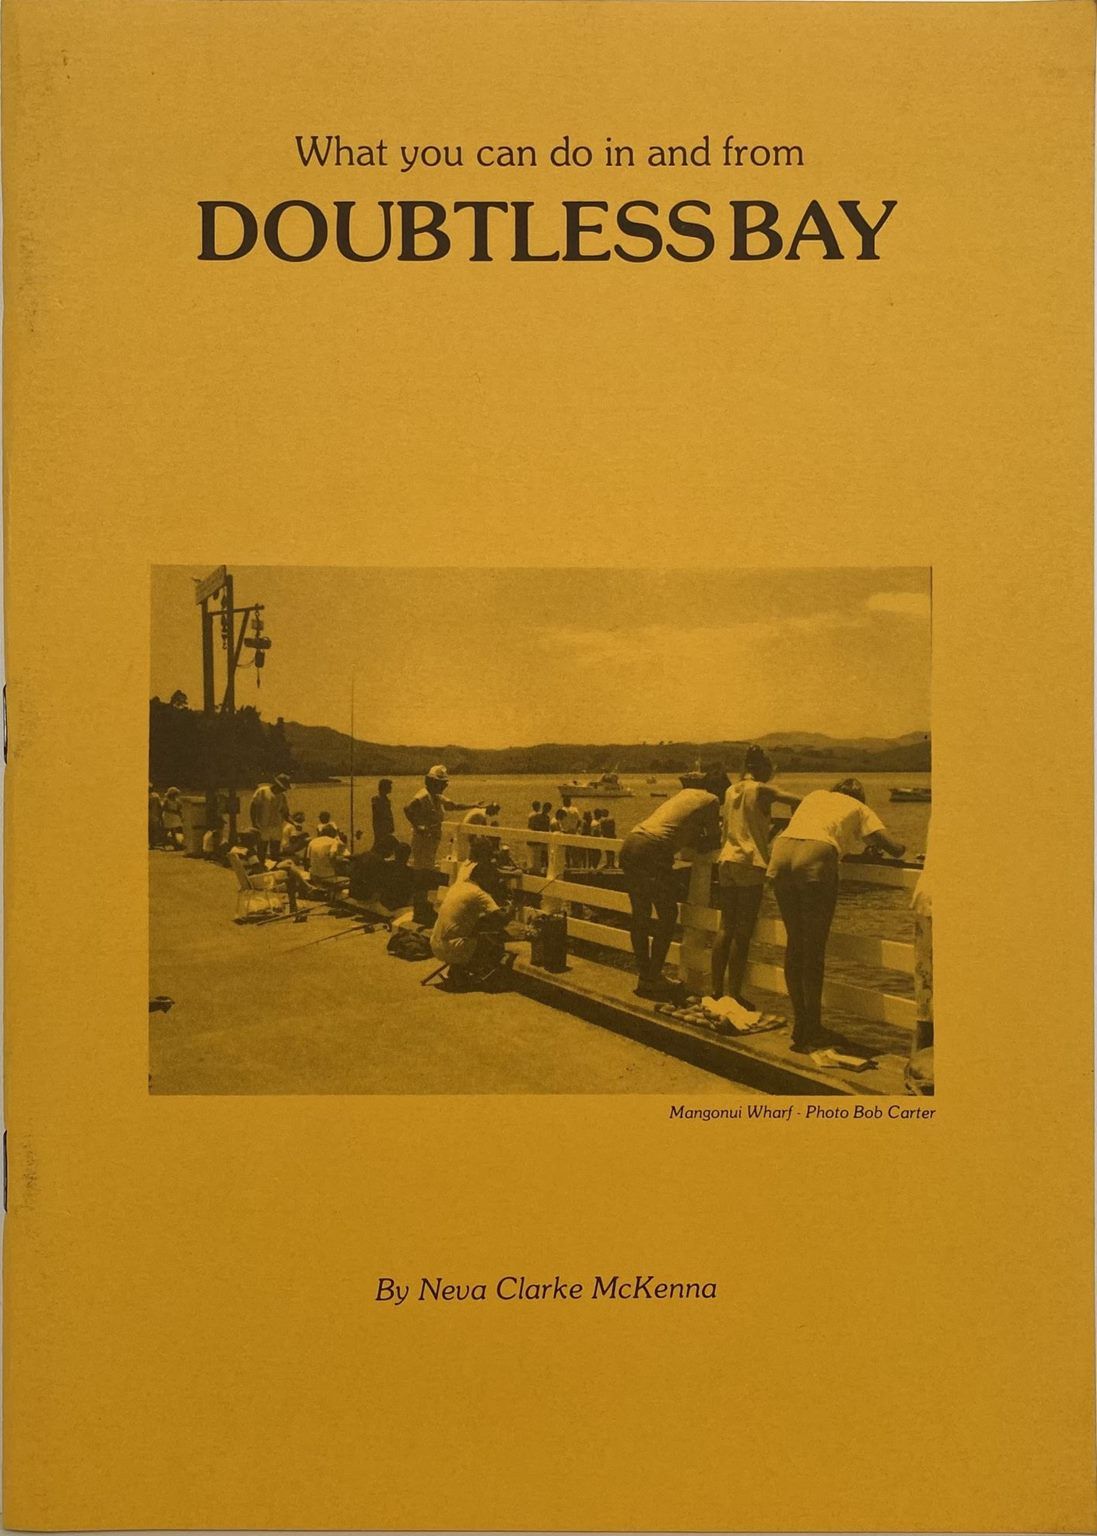 DOUBTLESS BAY: What you can do in and from